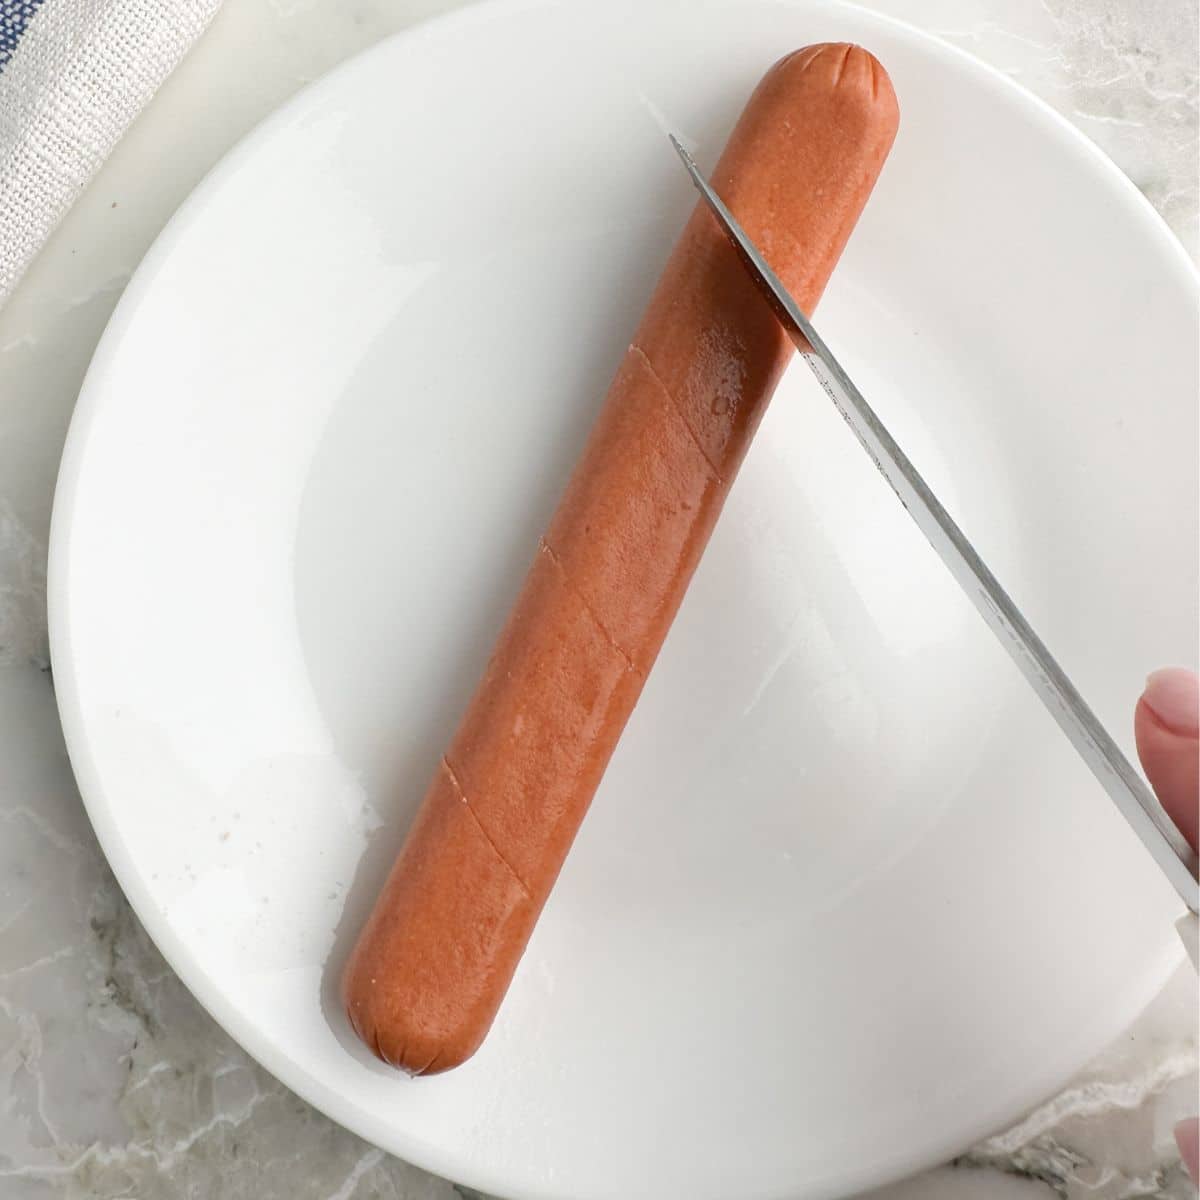 Hot dog on a plate with knife cutting into it. 